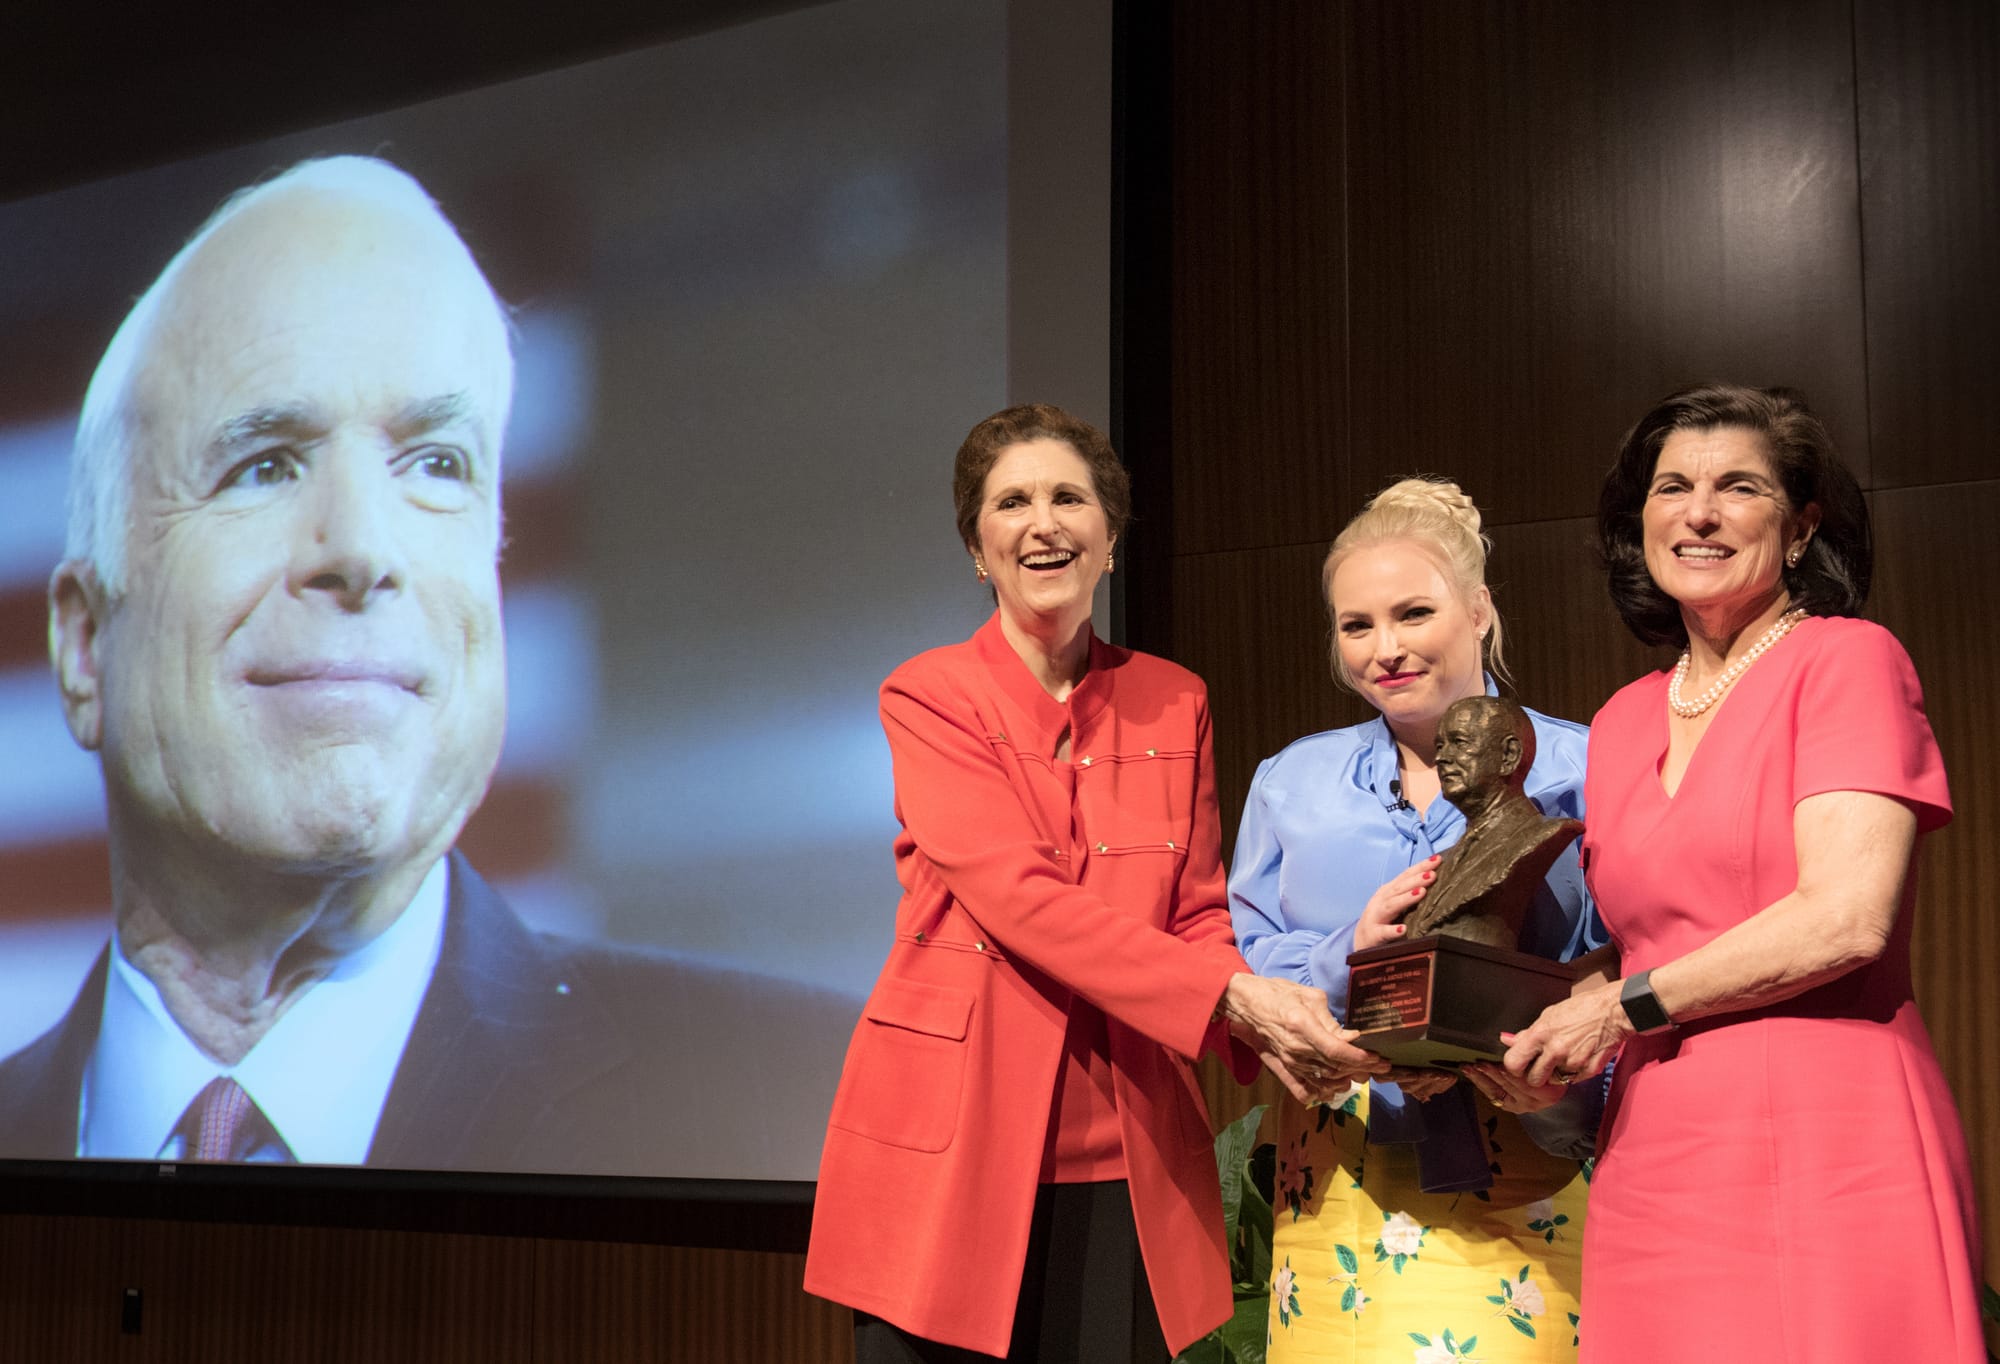 Accepting for her father, Senator John McCain, Meghan McCain receives the LBJ Liberty & Justice for All Award from President Lyndon B. Johnson's daughters, Luci Baines Johnson and Lynda Johnson Robb. LBJ Library photo by Jay Godwin.